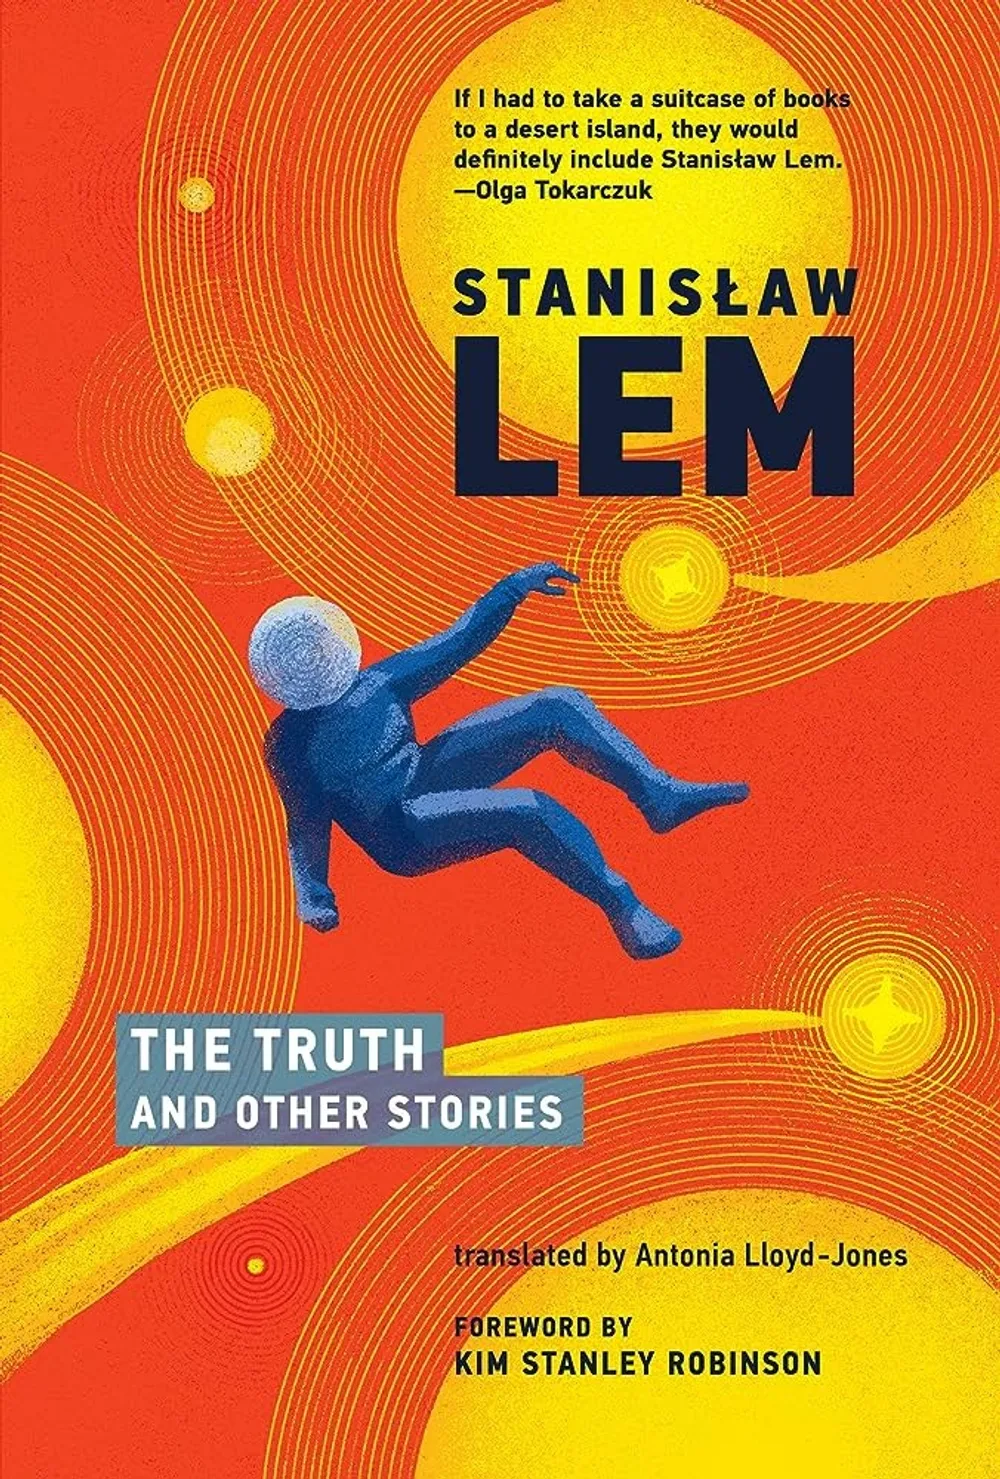 The Truth and Other Stories, by Stanisław Lem